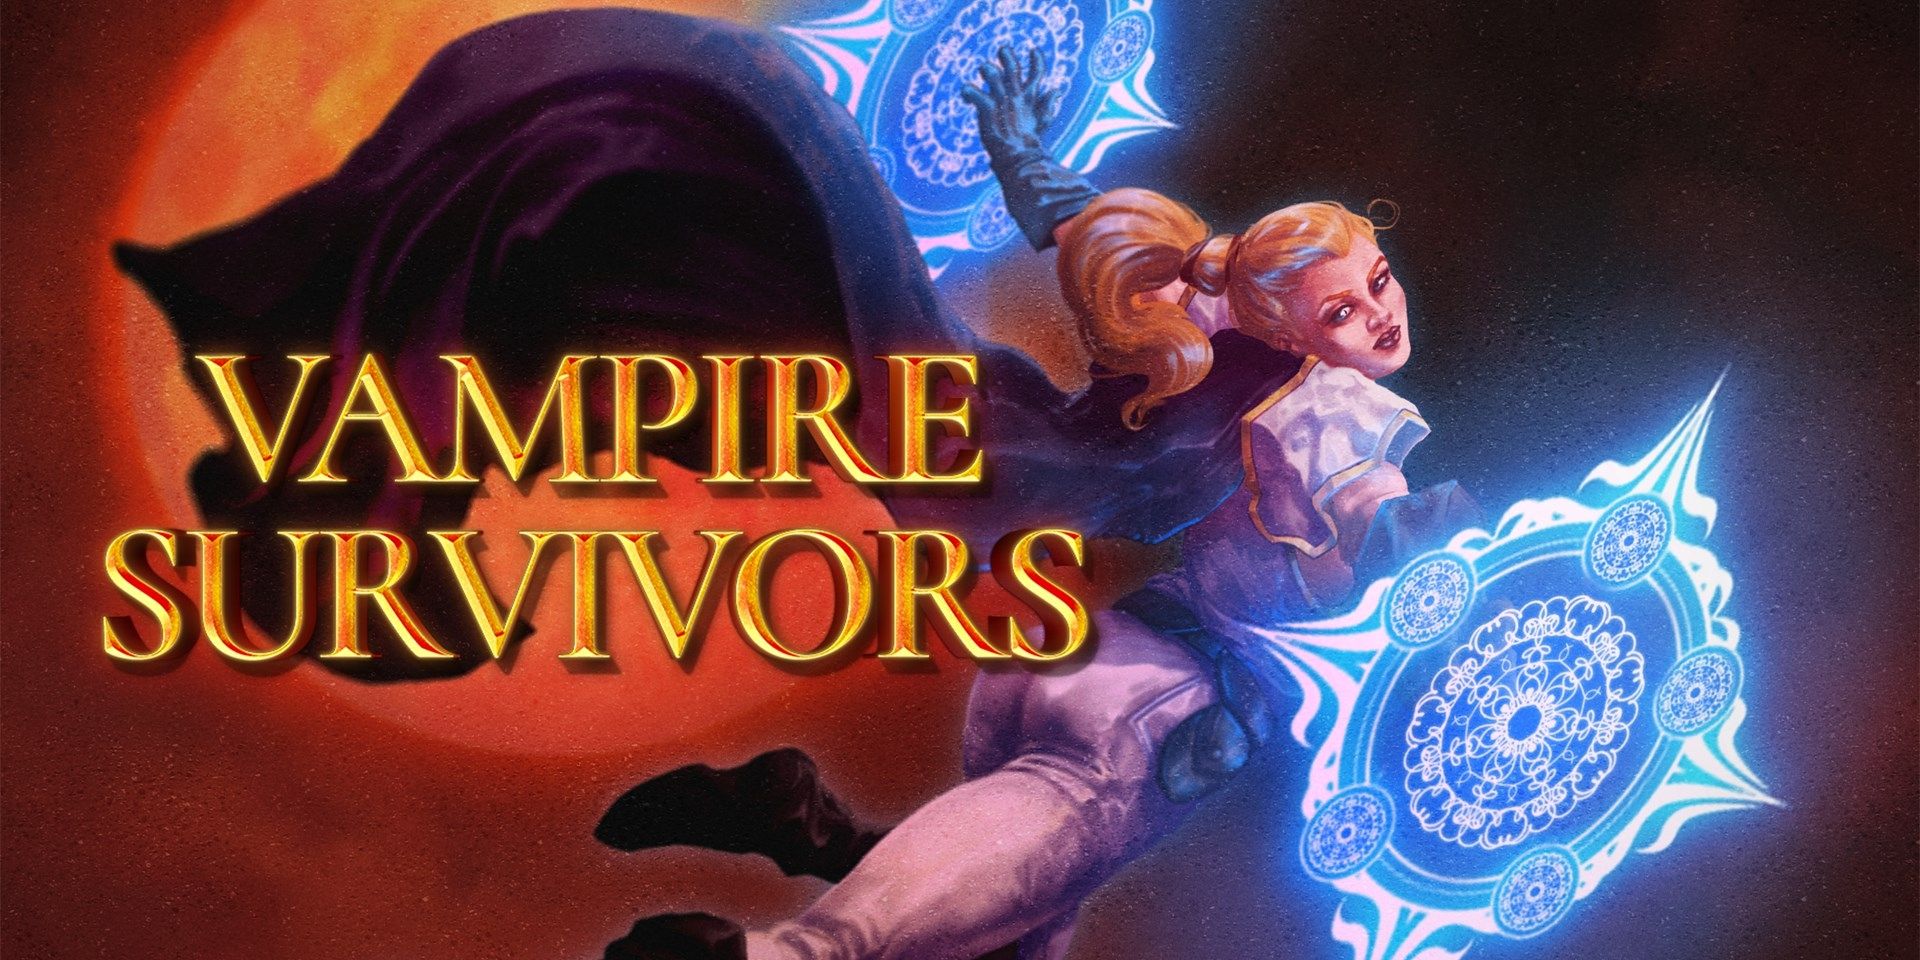 Vampire Survivors started a craze and the 1.0 release is out now